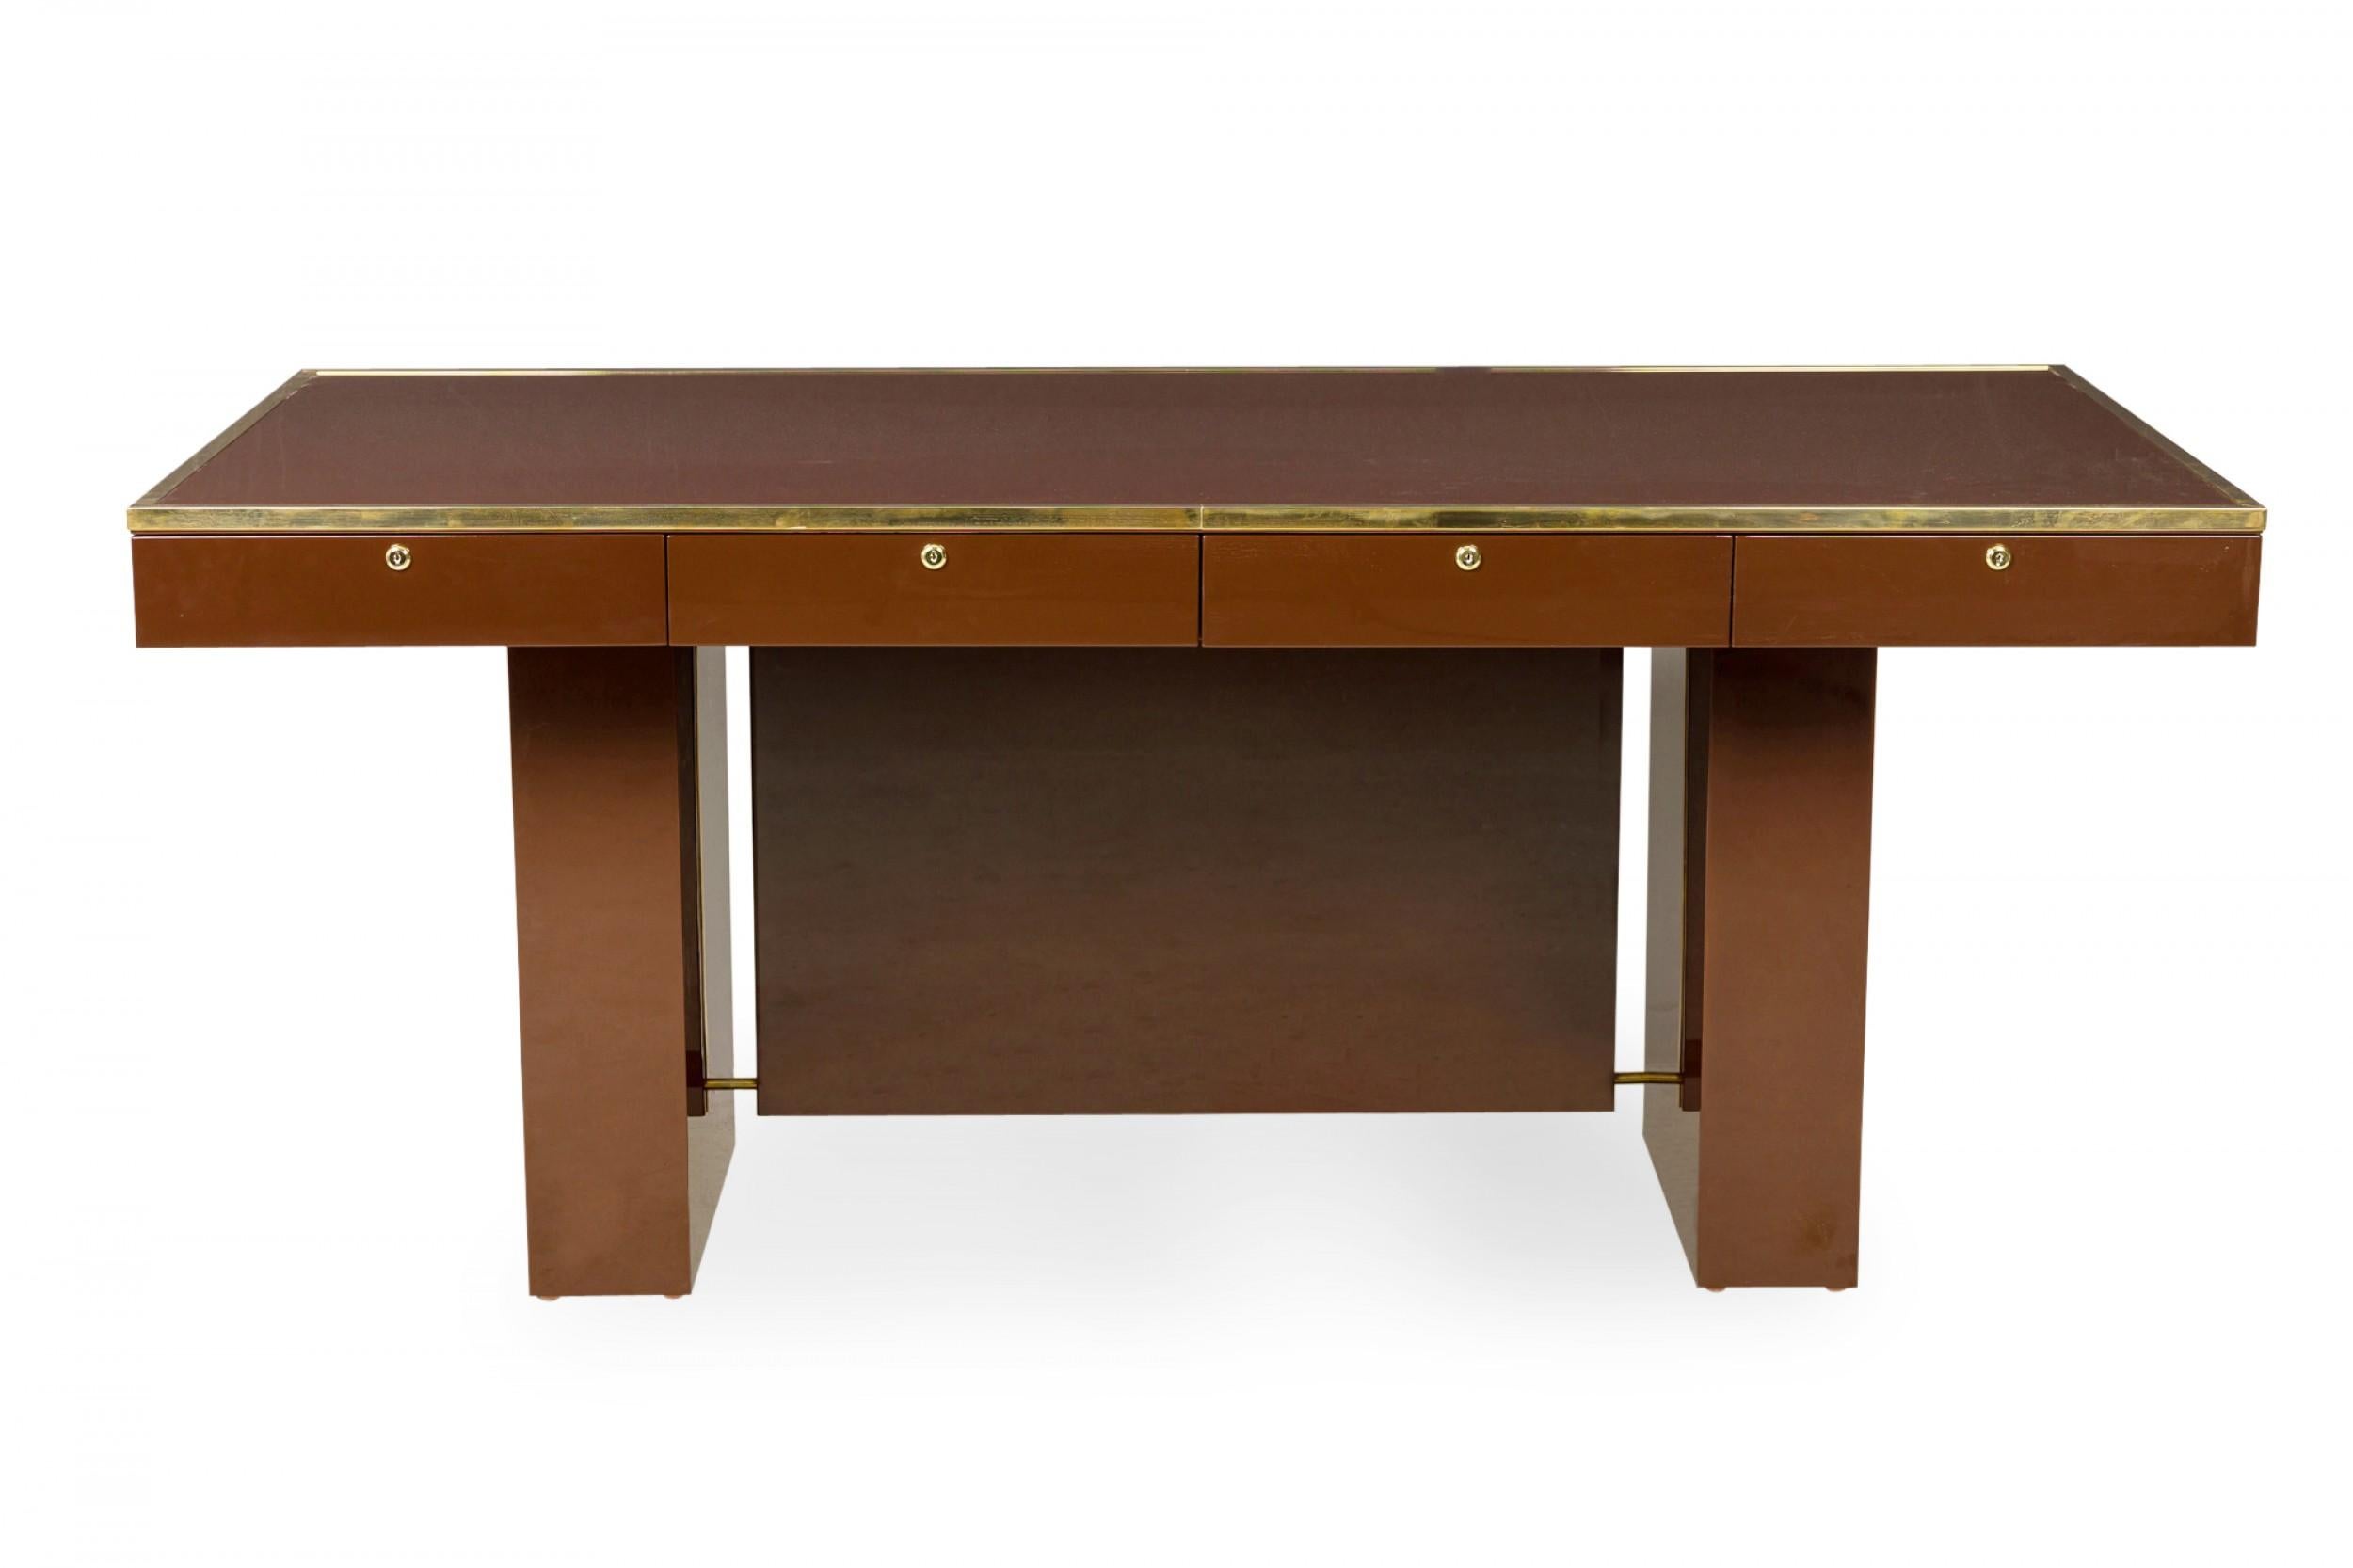 Contemporary American lacquered executive desk with brass trimmed edge and 4 drawers supported on 2 rectangular pedestals centering a vanity panel in the style of Aldo Tura.